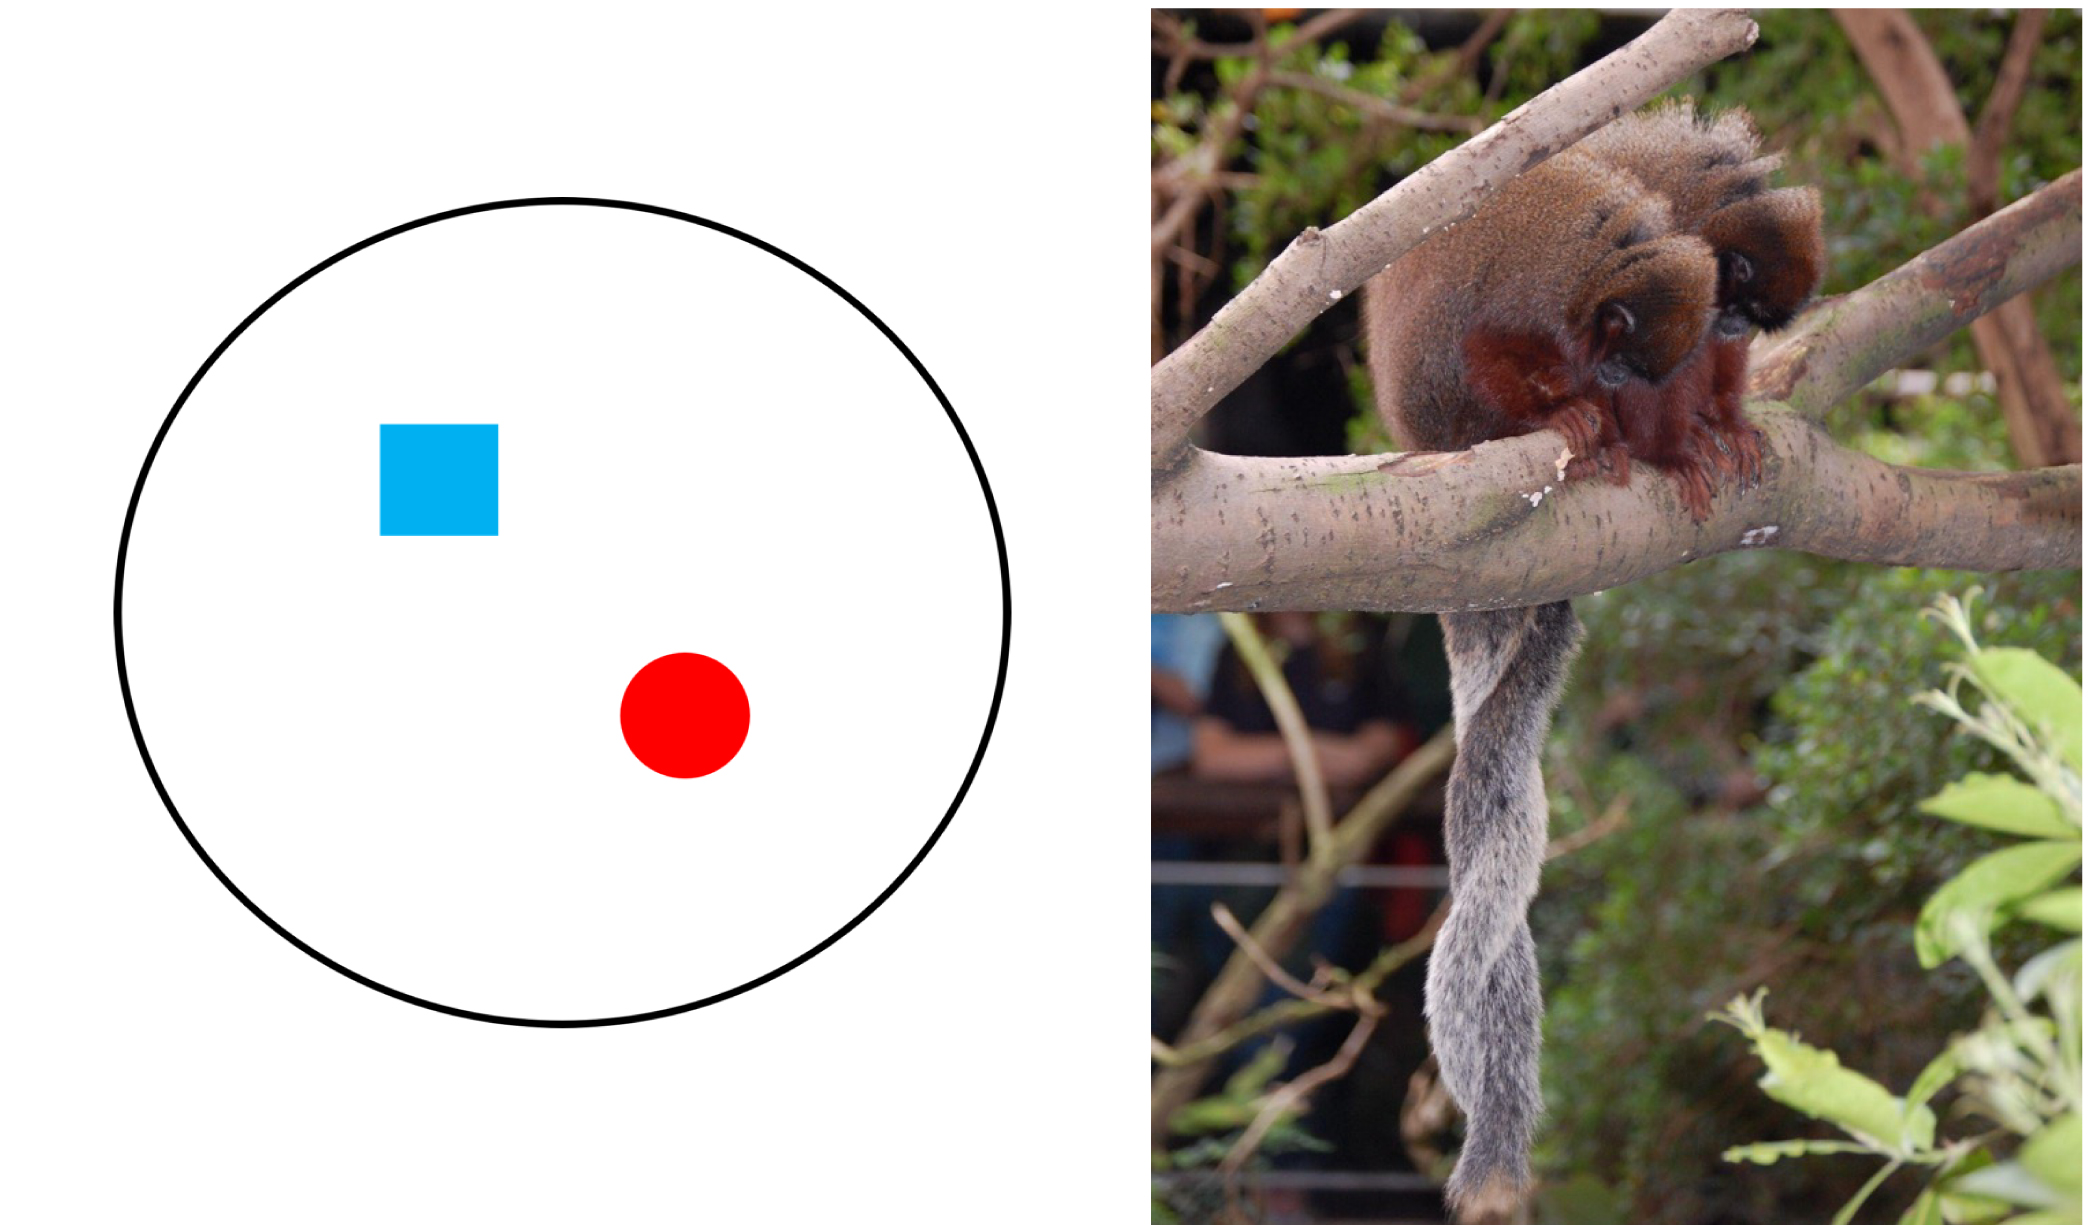 Left: Circle contains one dot (female) and one square (male). Right: Two titi monkeys.